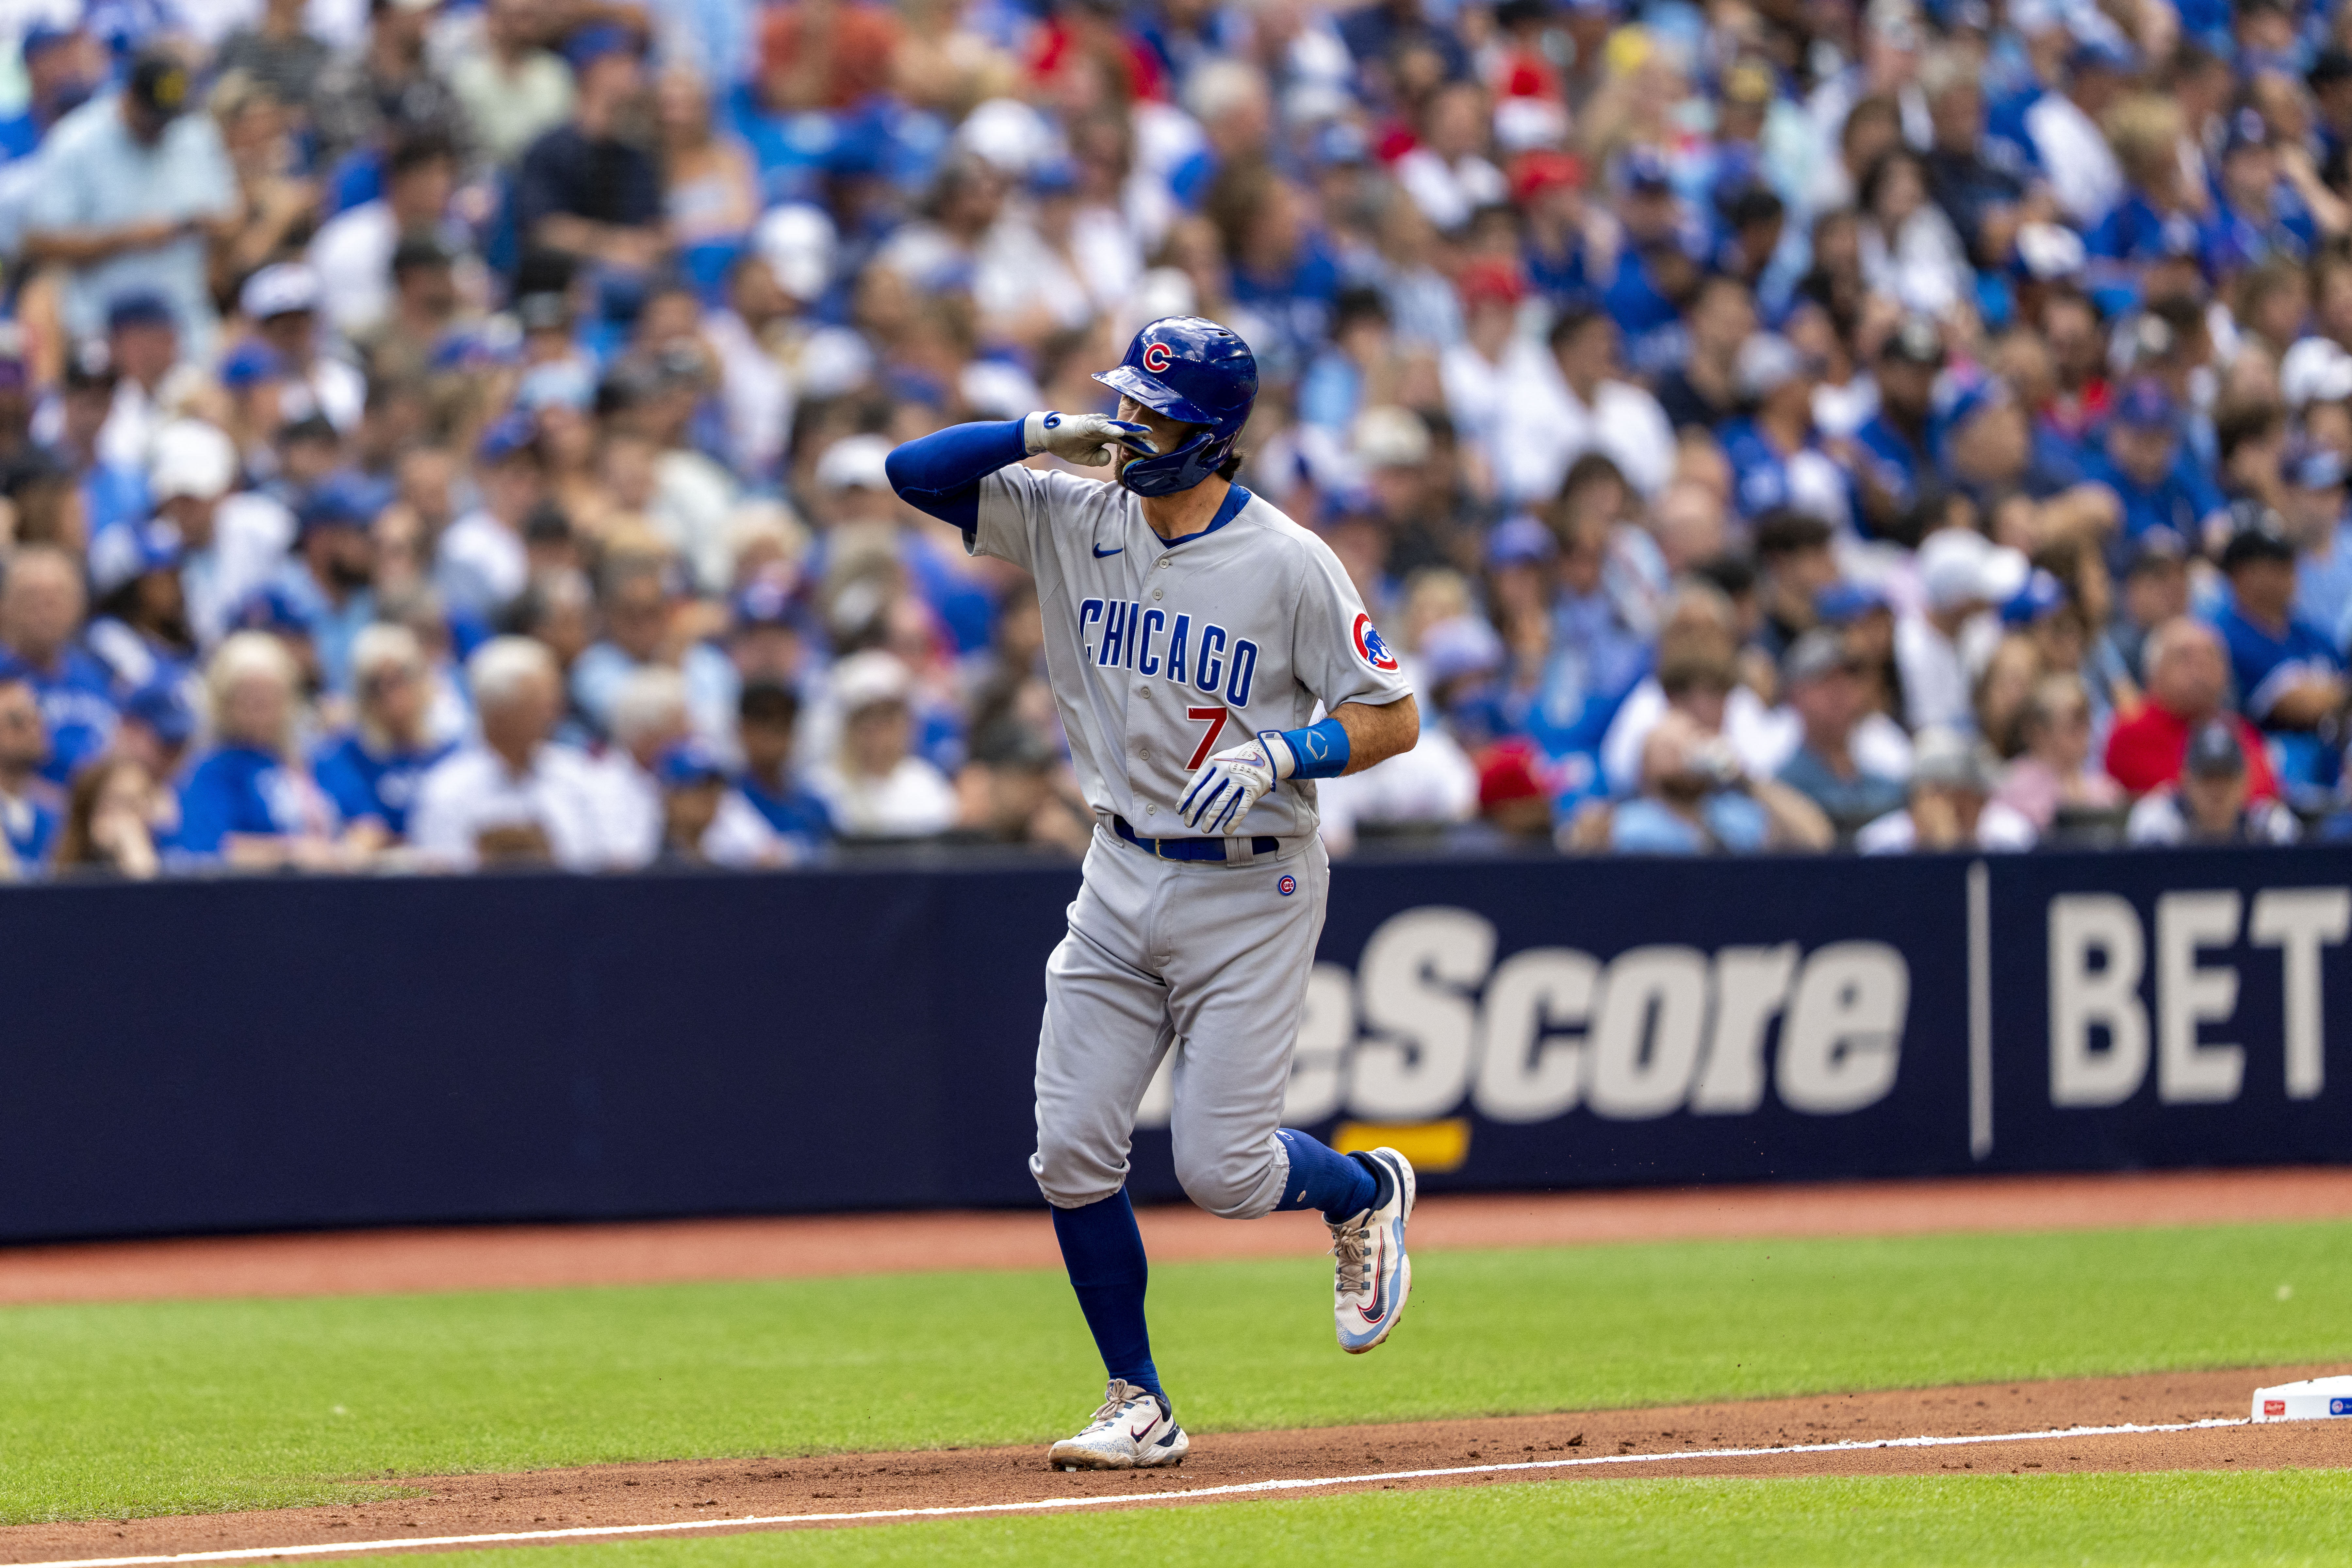 christopher-morel-homers-as-chicago-cubs-beat-baltimore-orioles